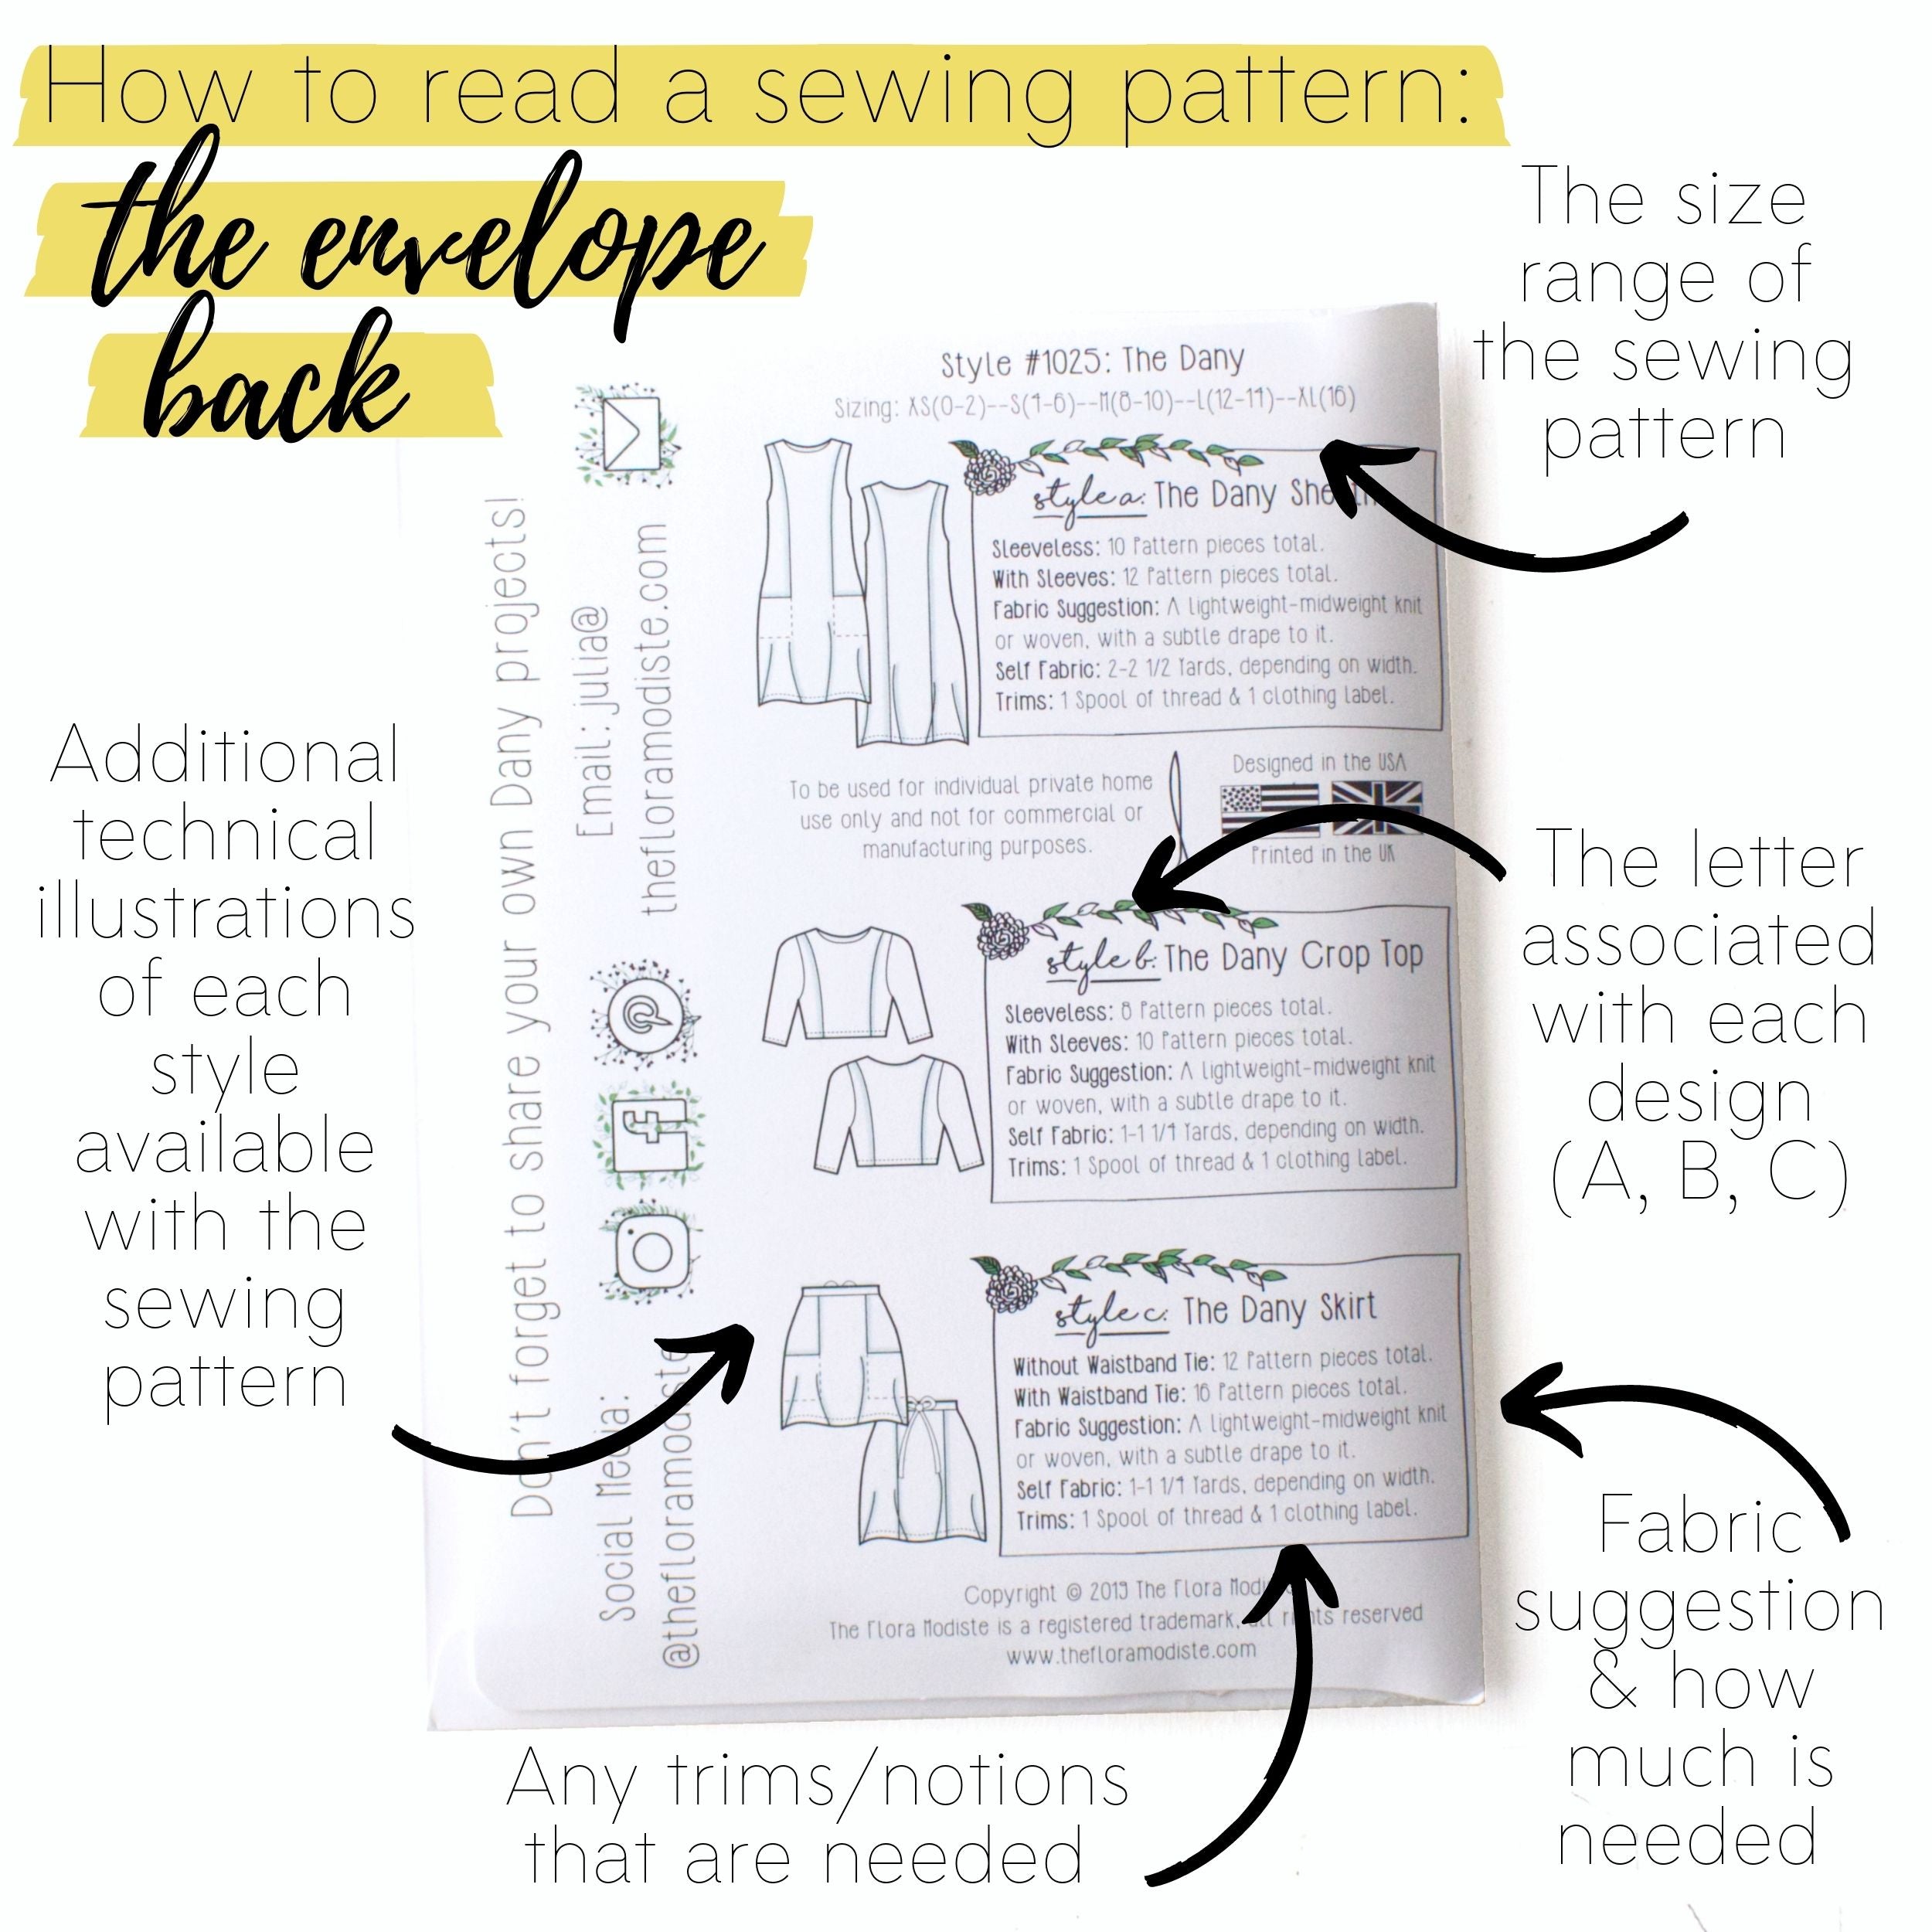 How to read a sewing pattern: The envelope back